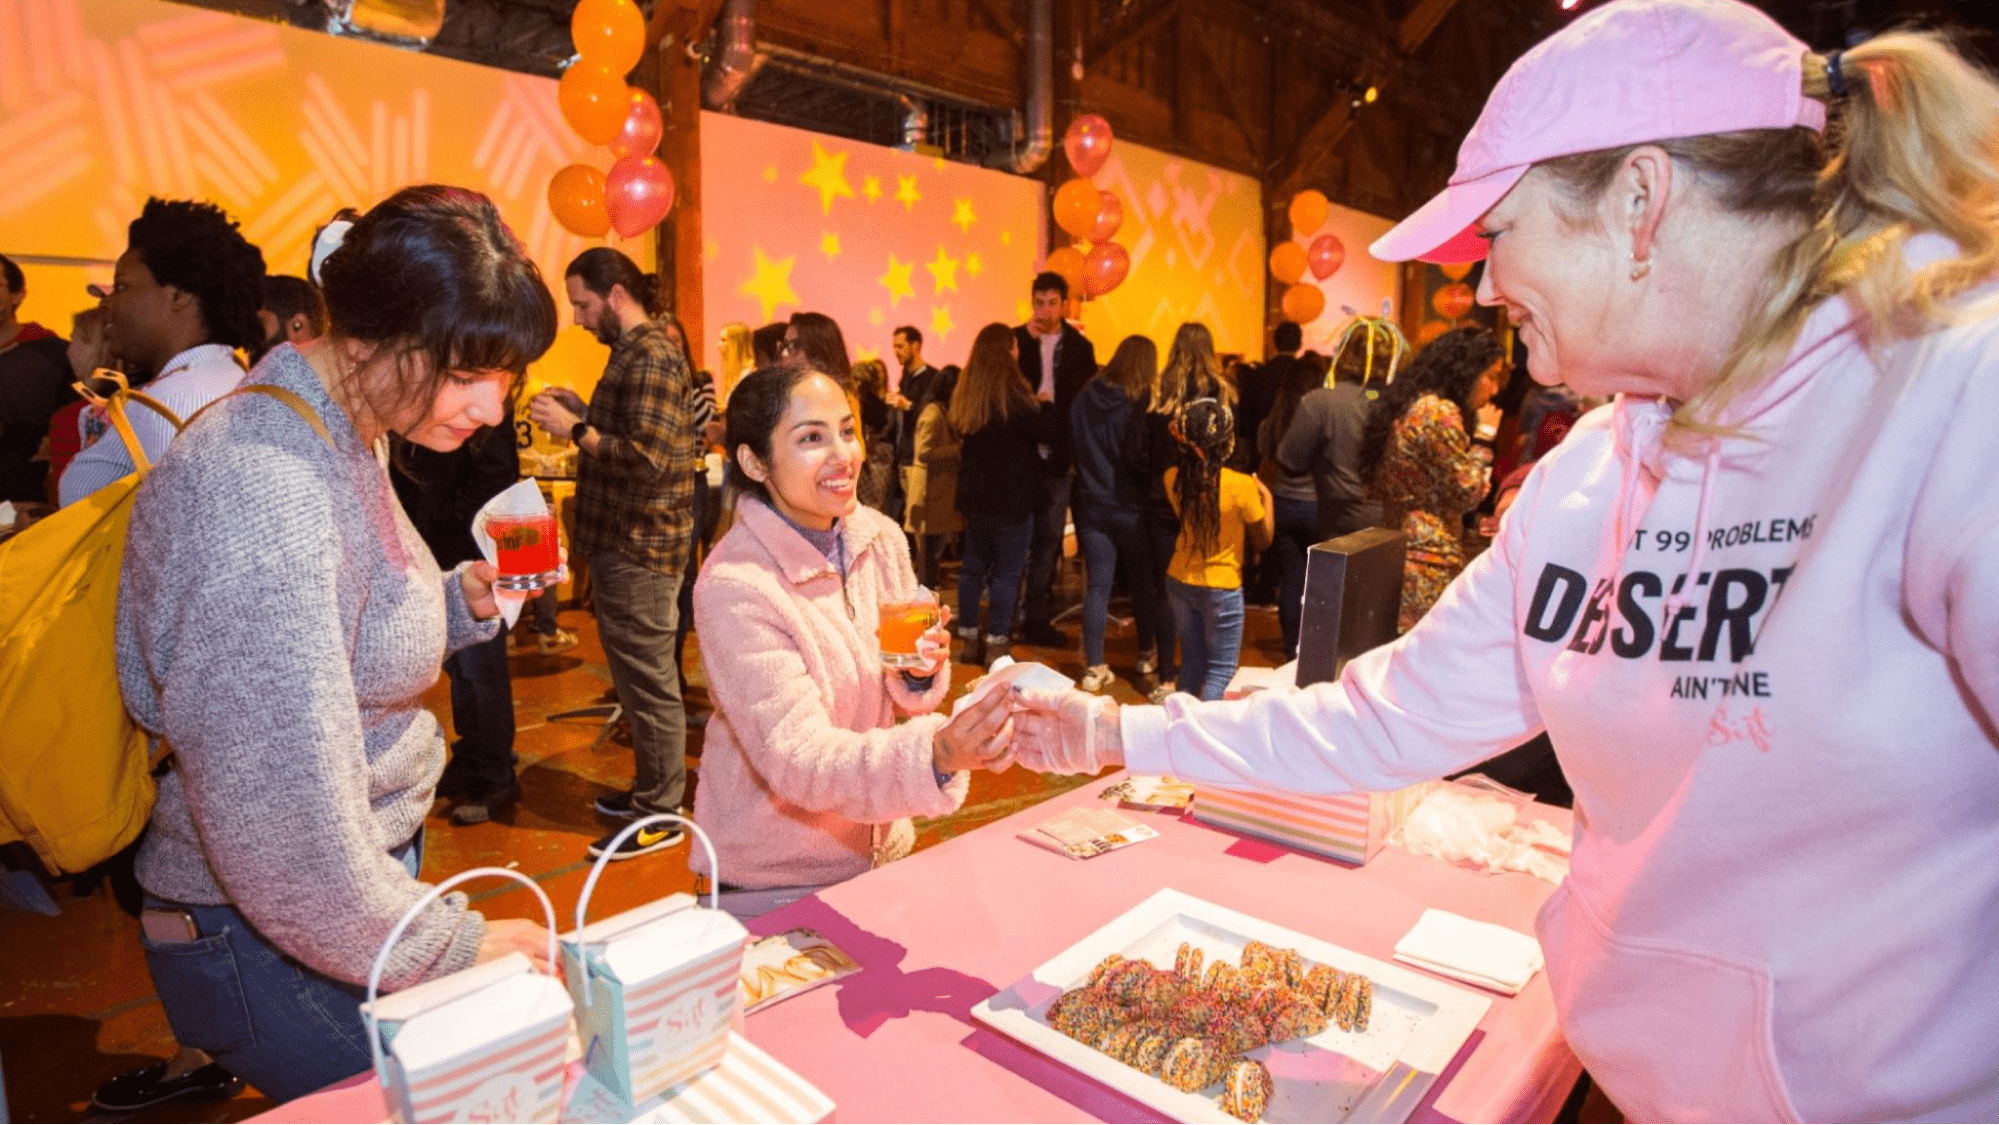 A vendor handing a cookie to a guest